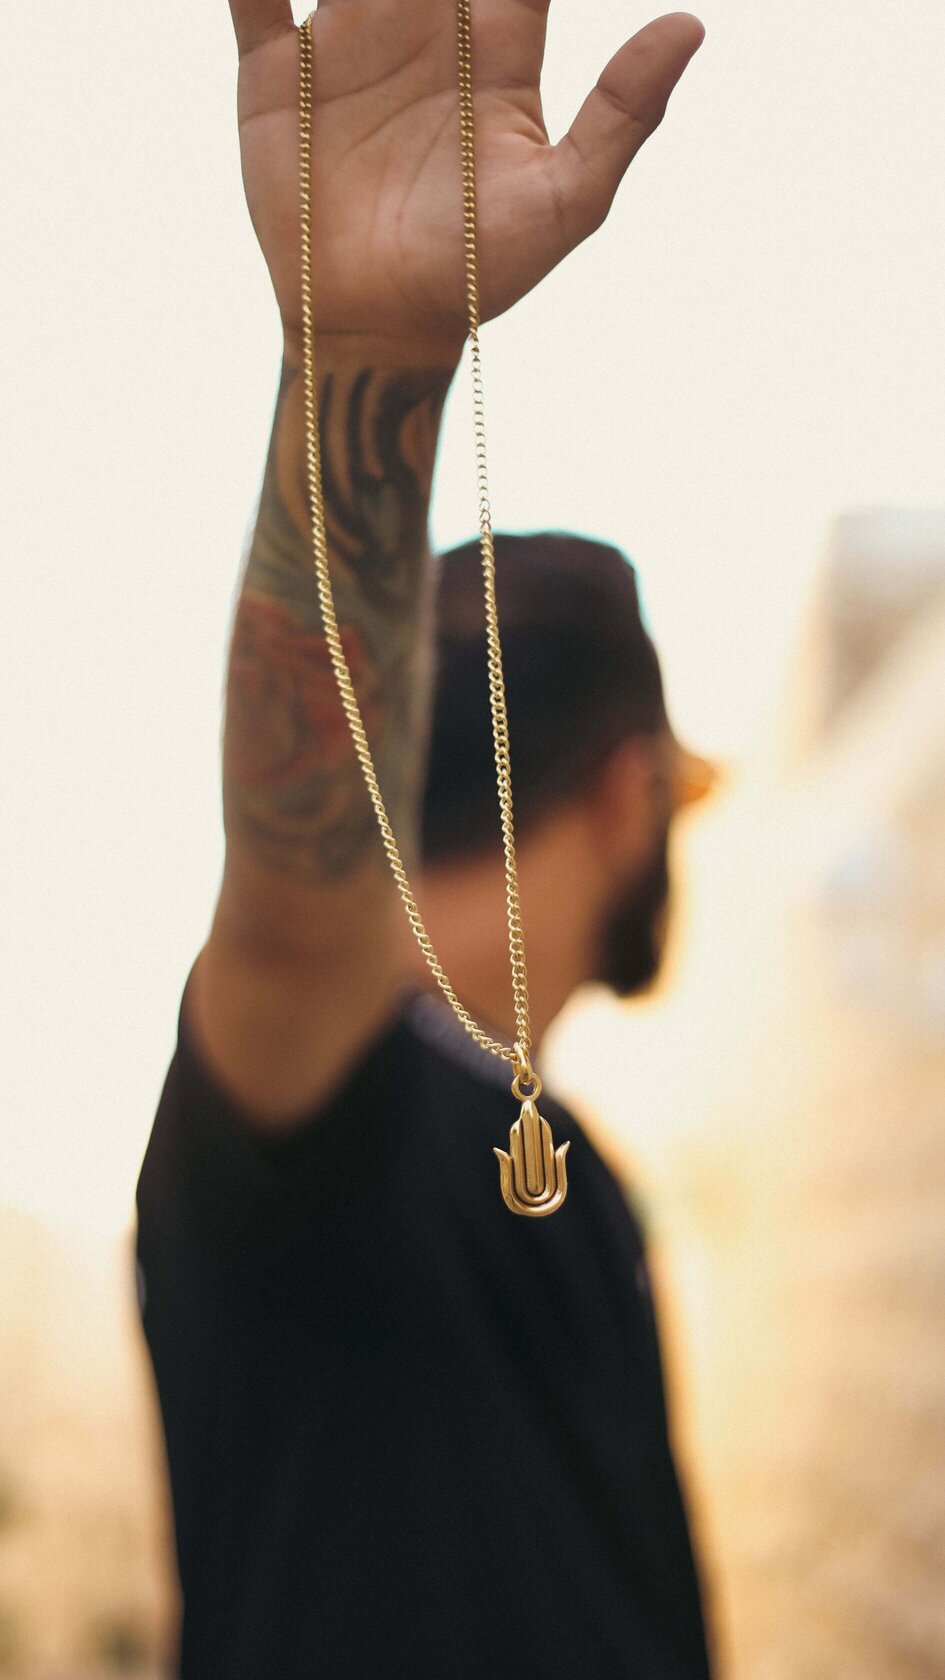 The Gold Plated Hamsa Hand Necklace